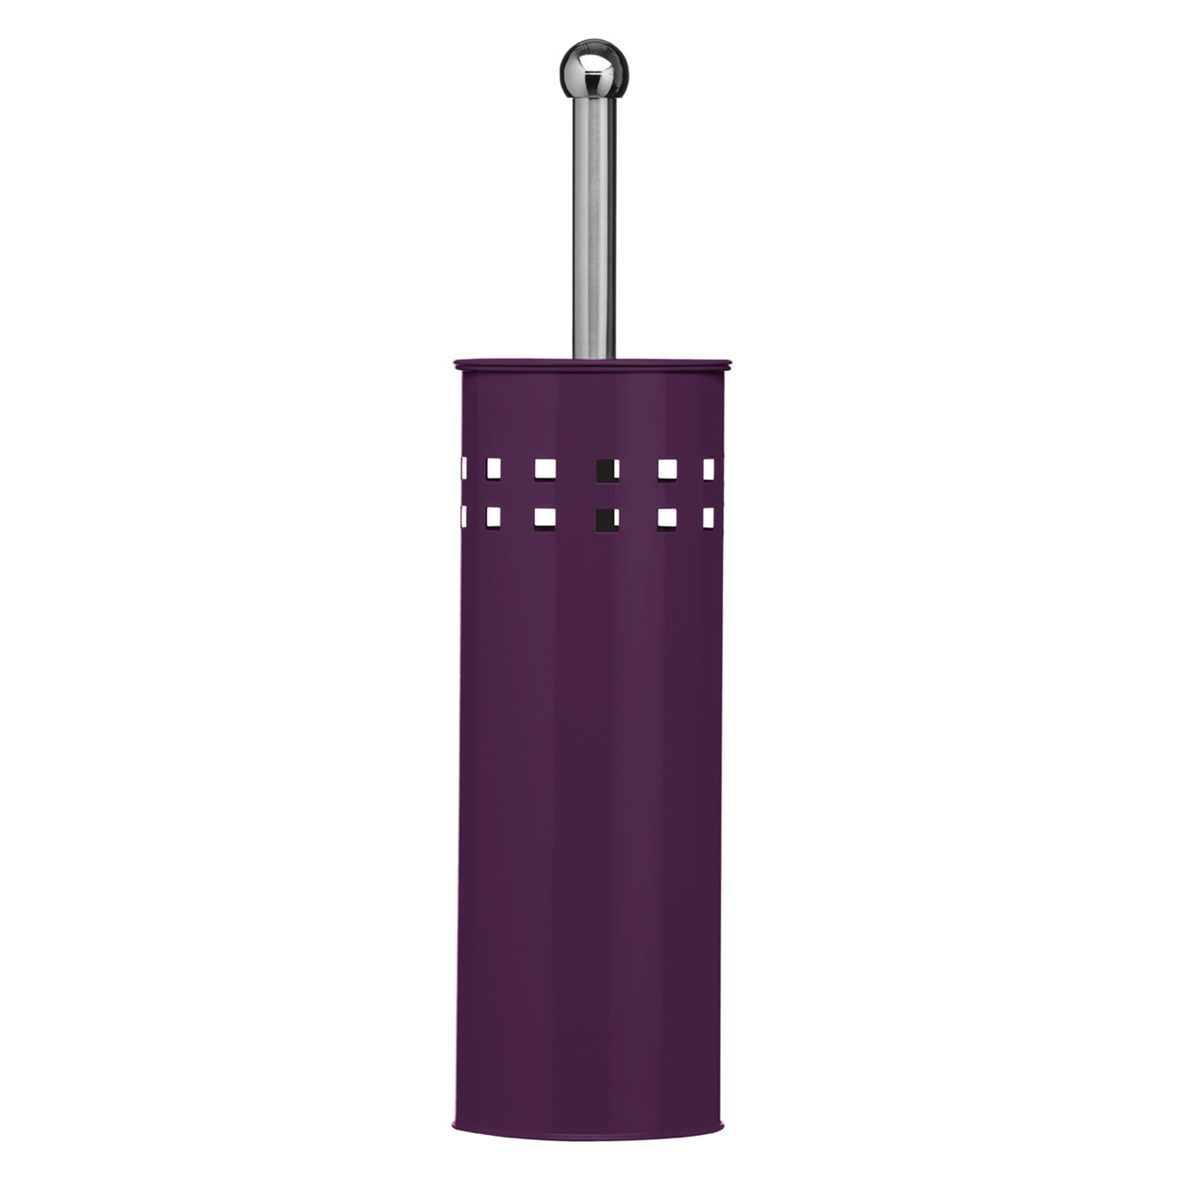 Accents Toilet brush stainless steel purple